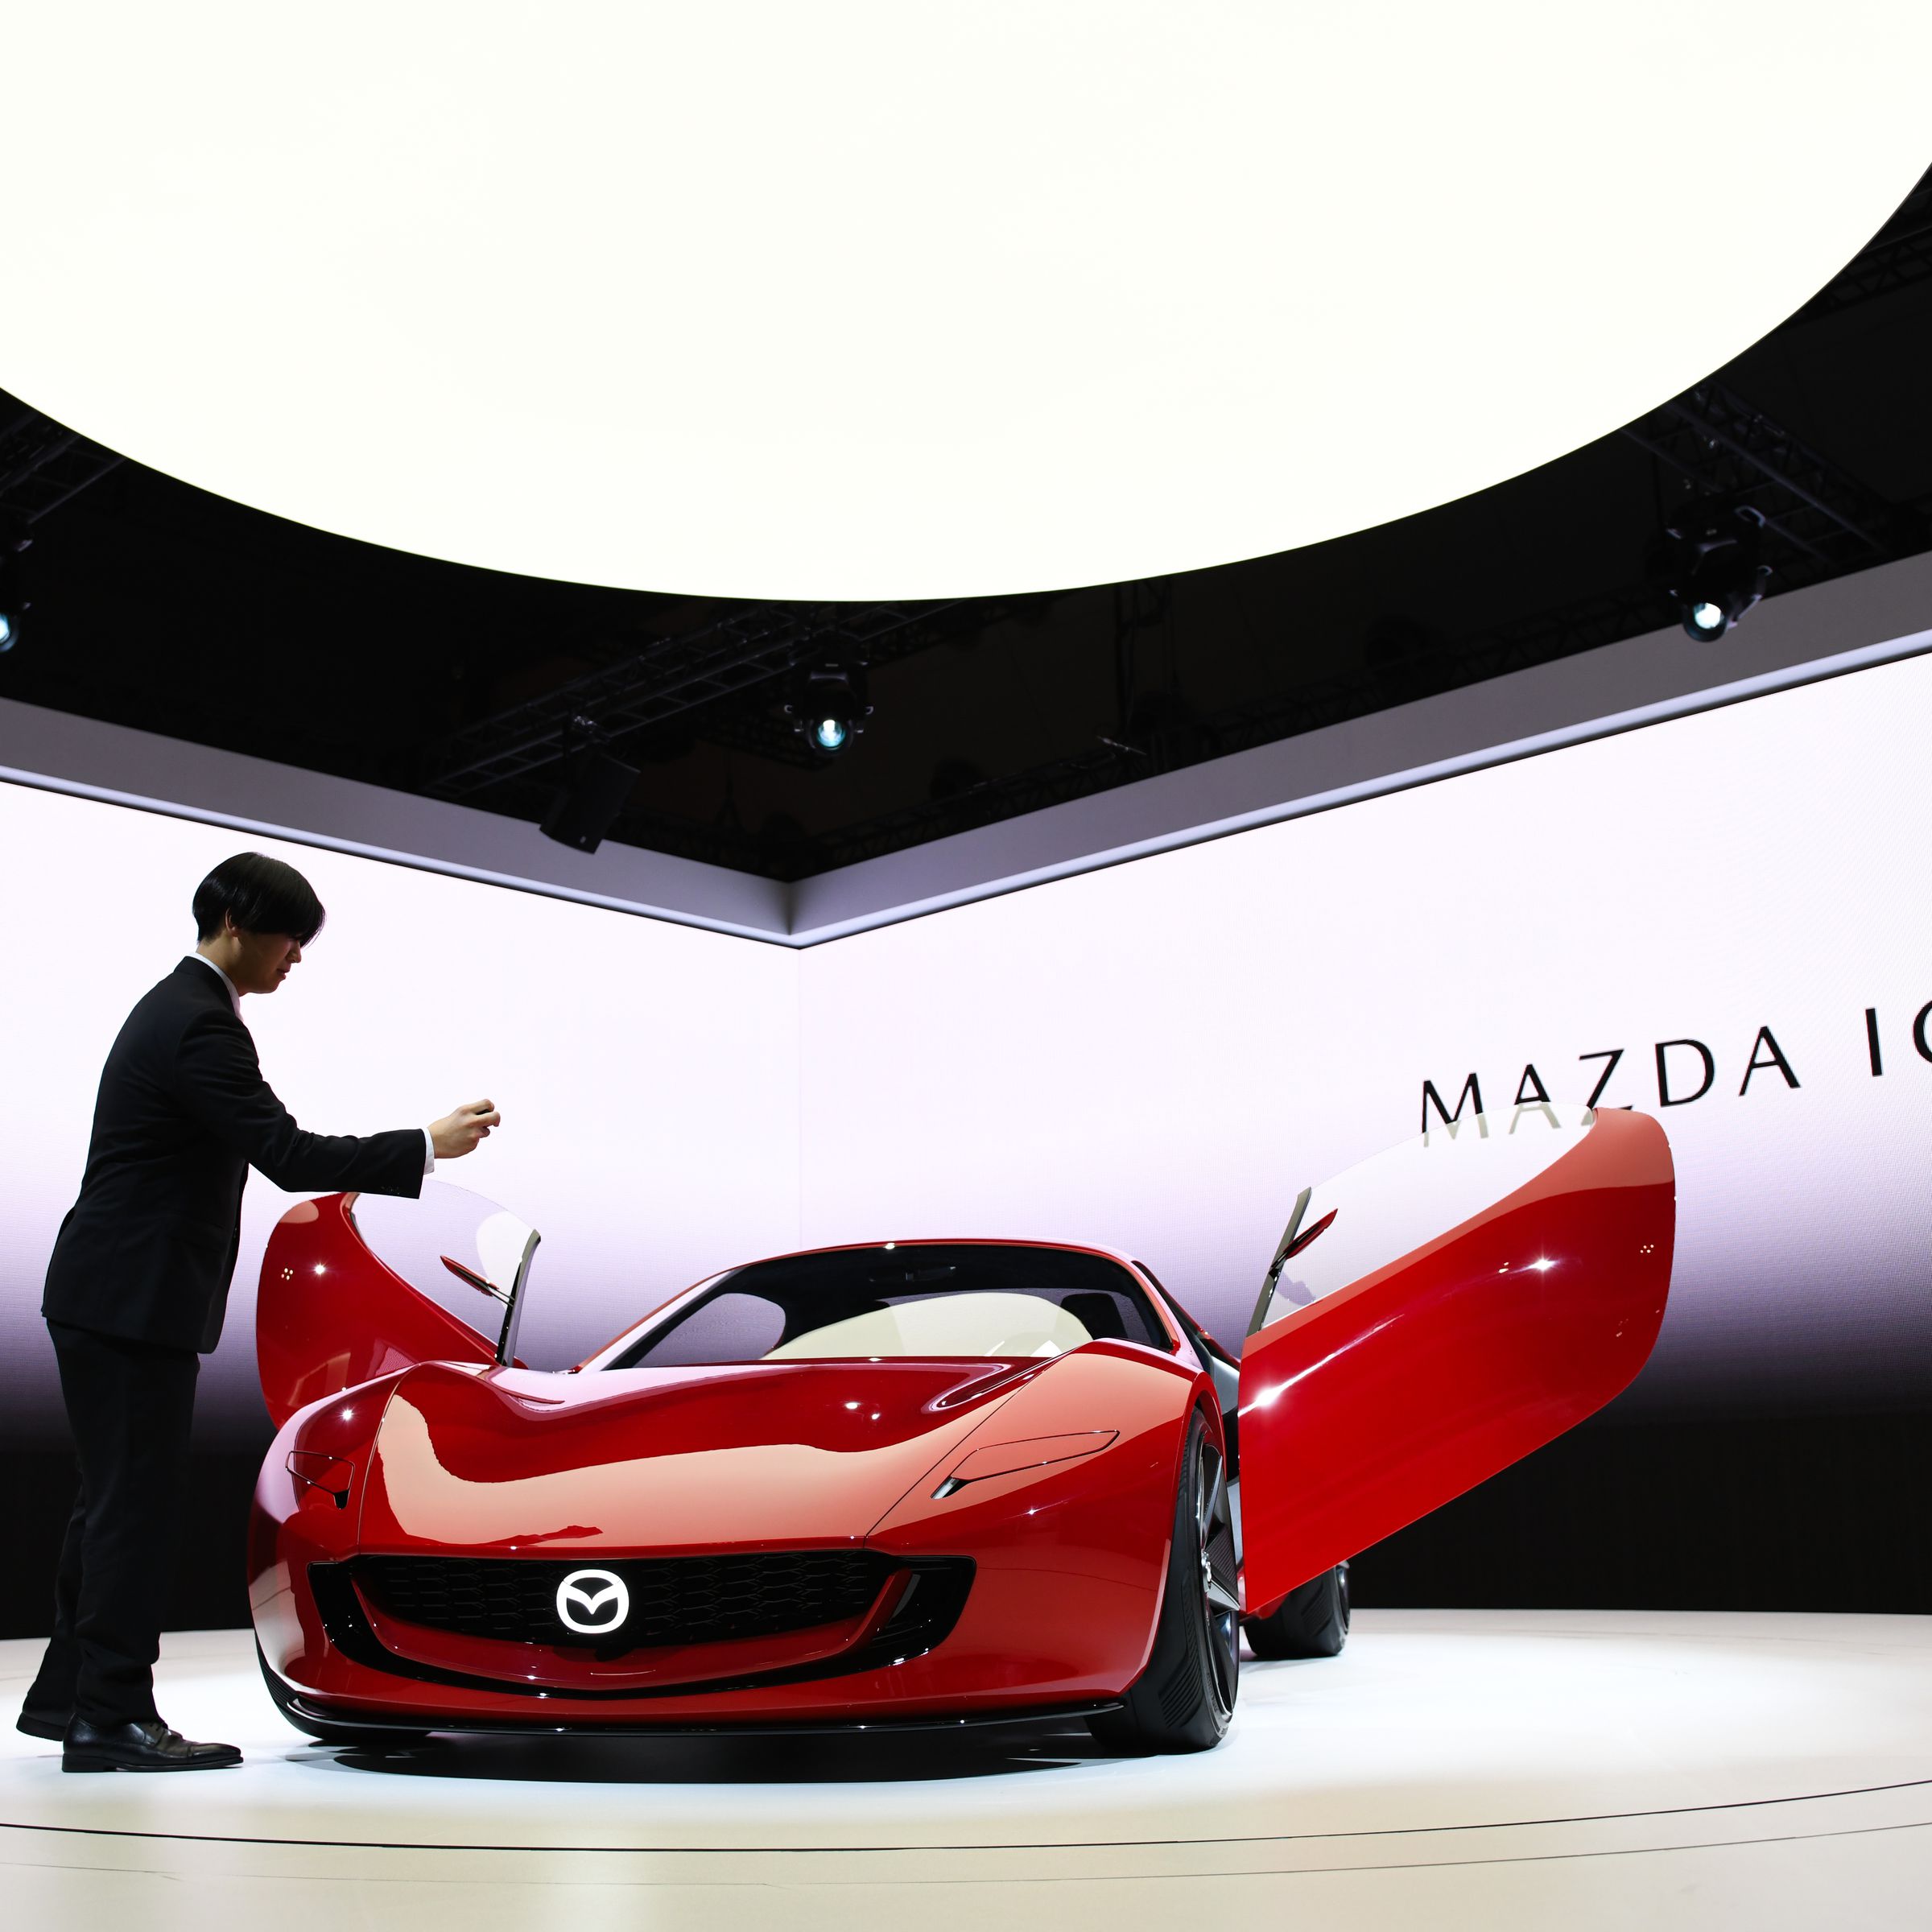 Mazda’s Iconic SP concept at the Japan Mobility Show